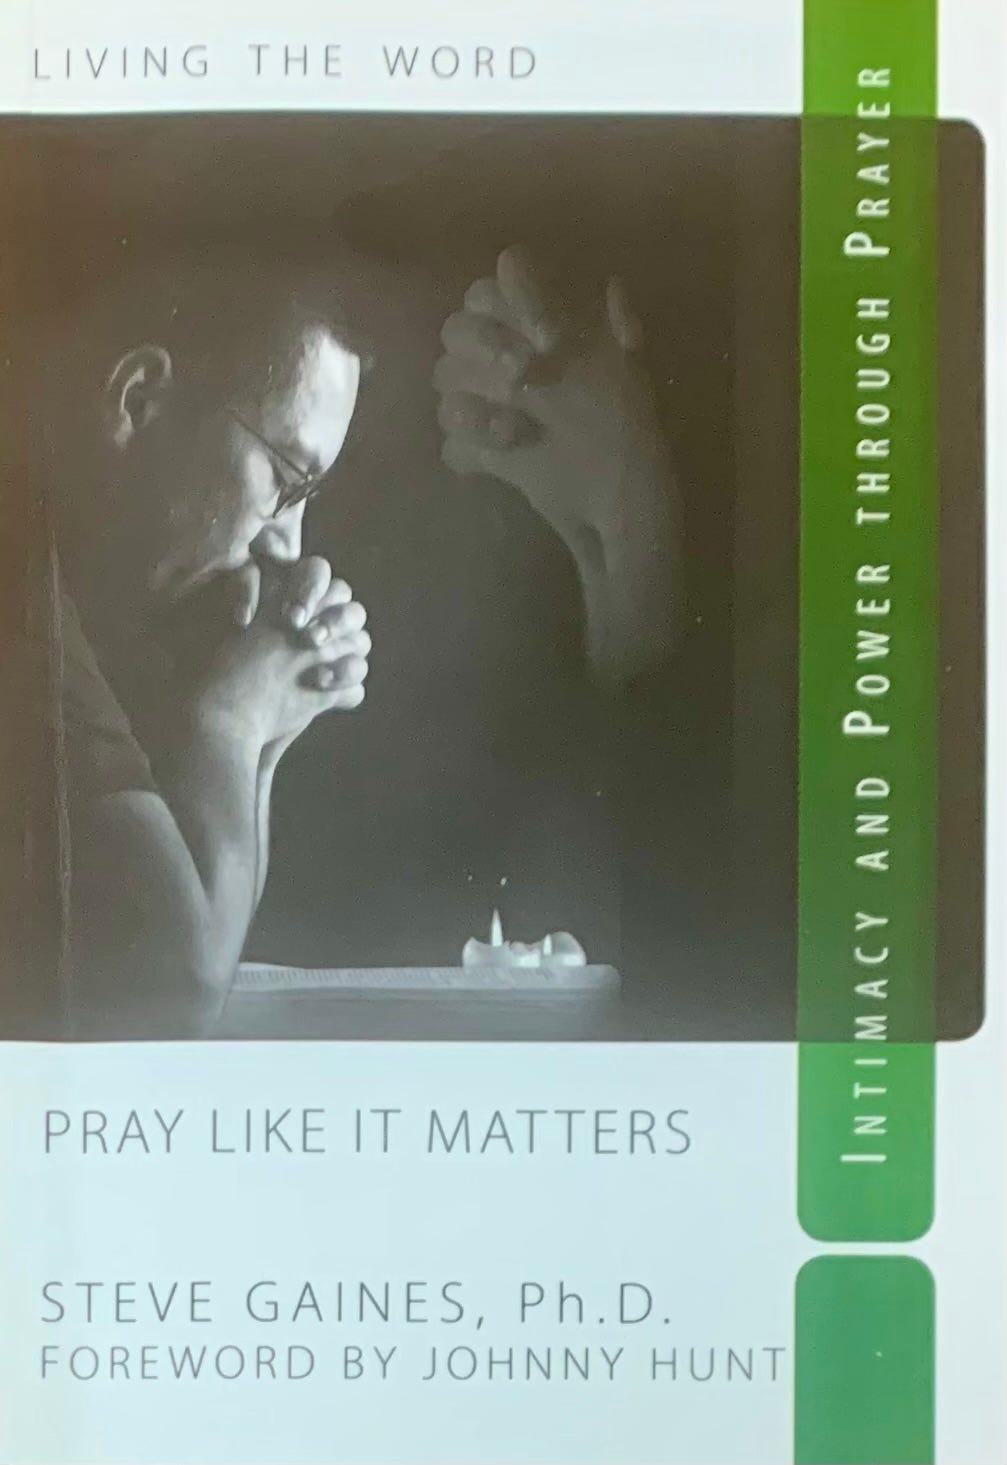 Image of the book cover to Pray Like It Matters by Steve Gaines.